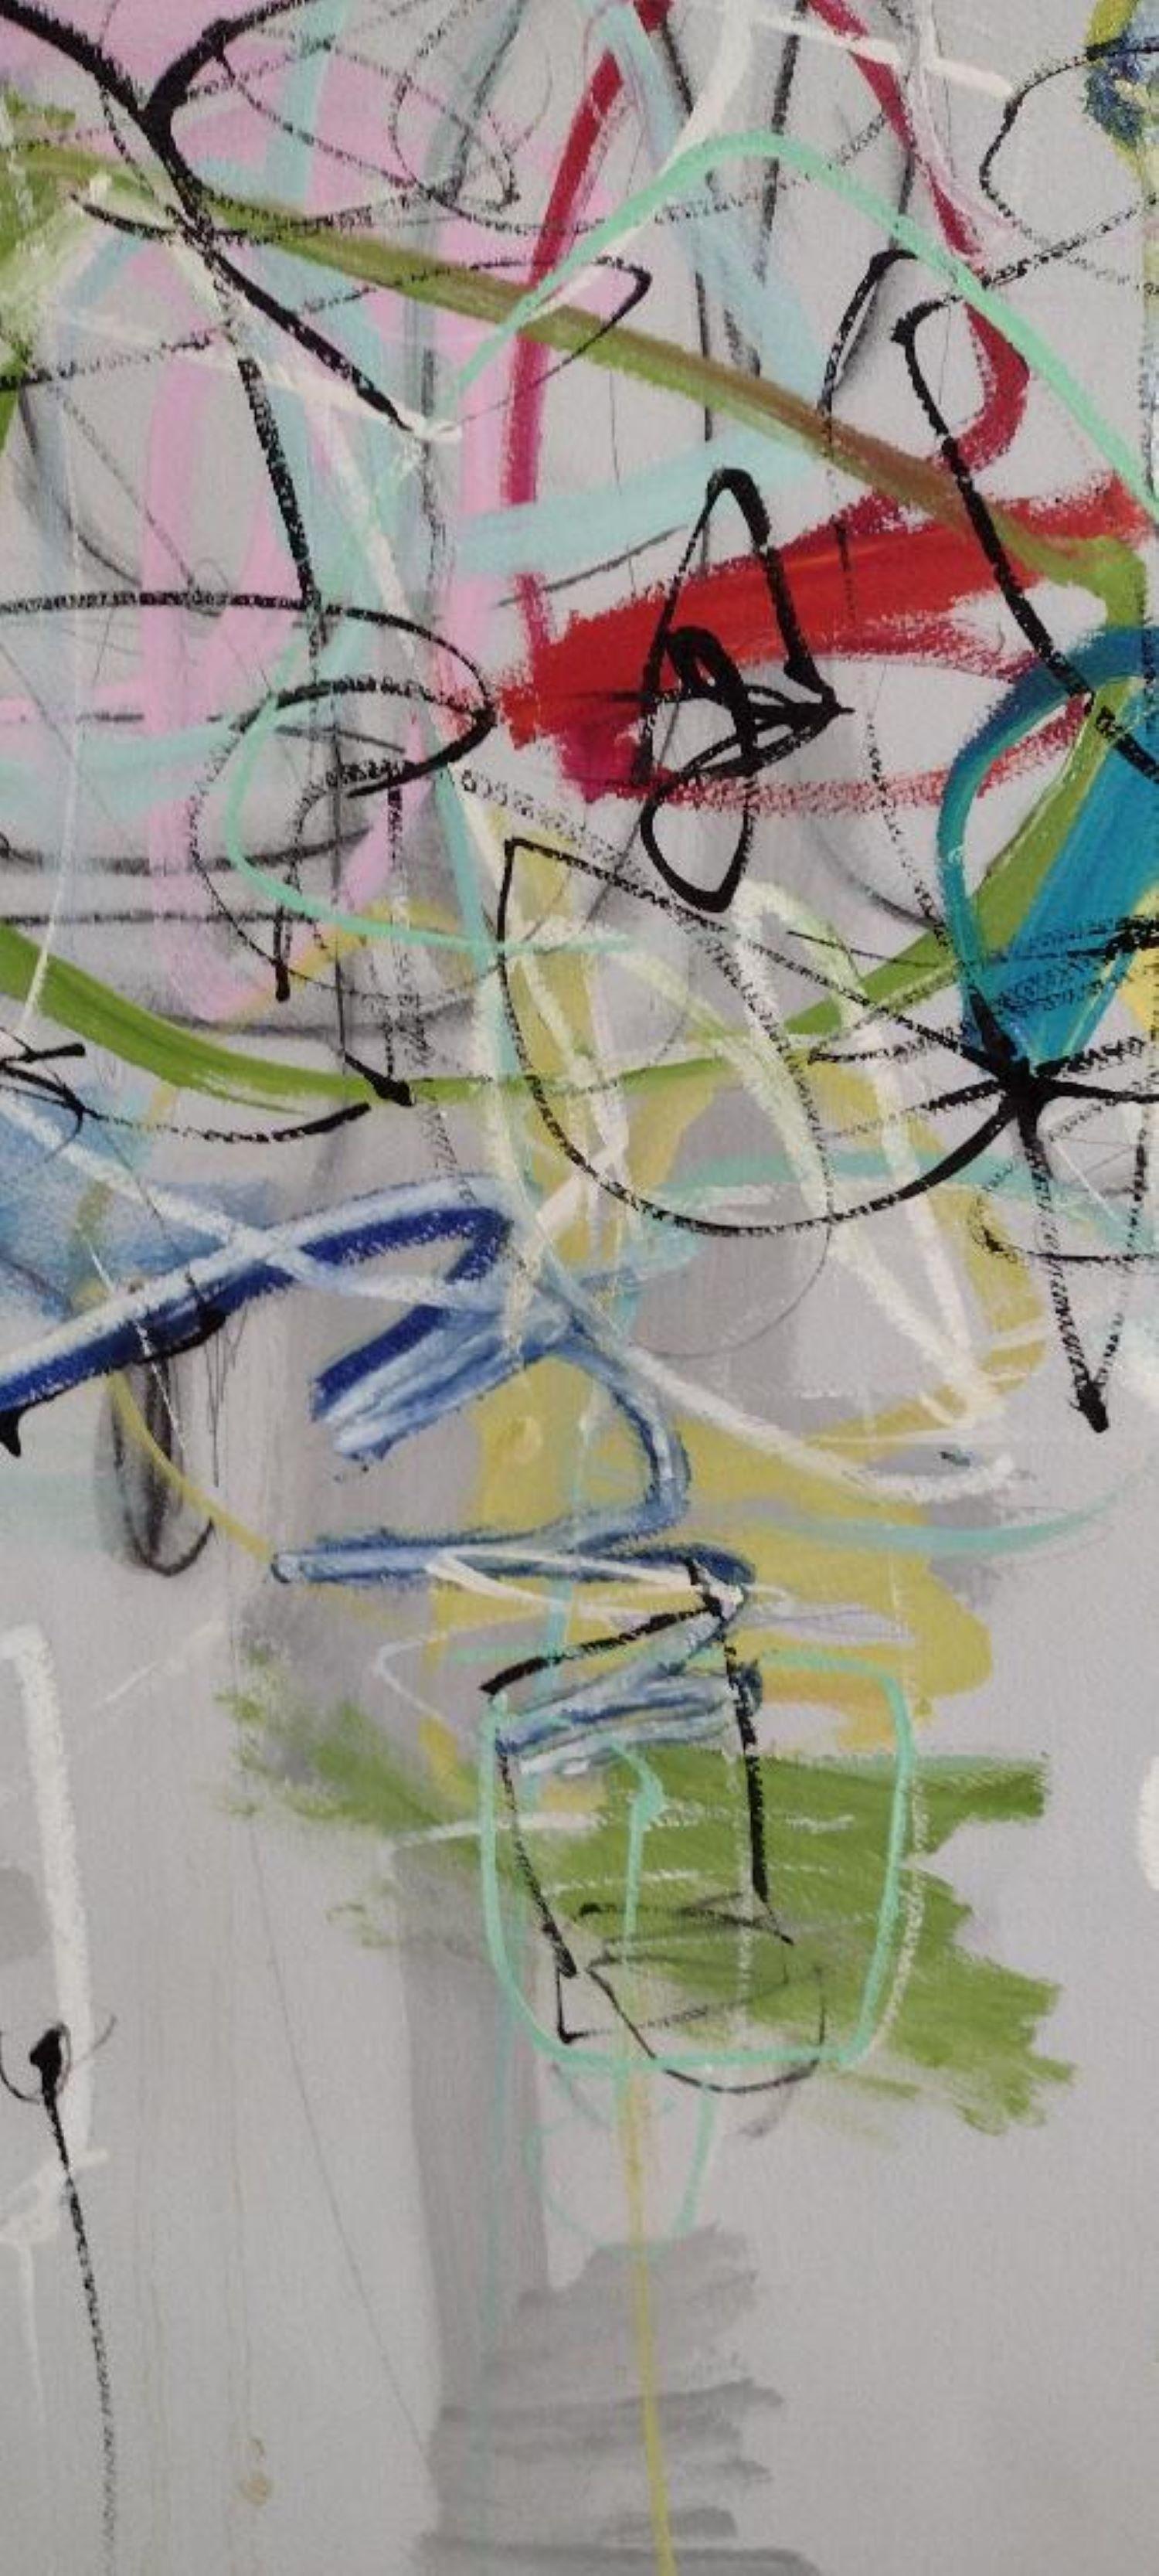 Songs I - Original abstract-lyrical, playful, vital, alive, bold colors on gray - Painting by Mia Stone